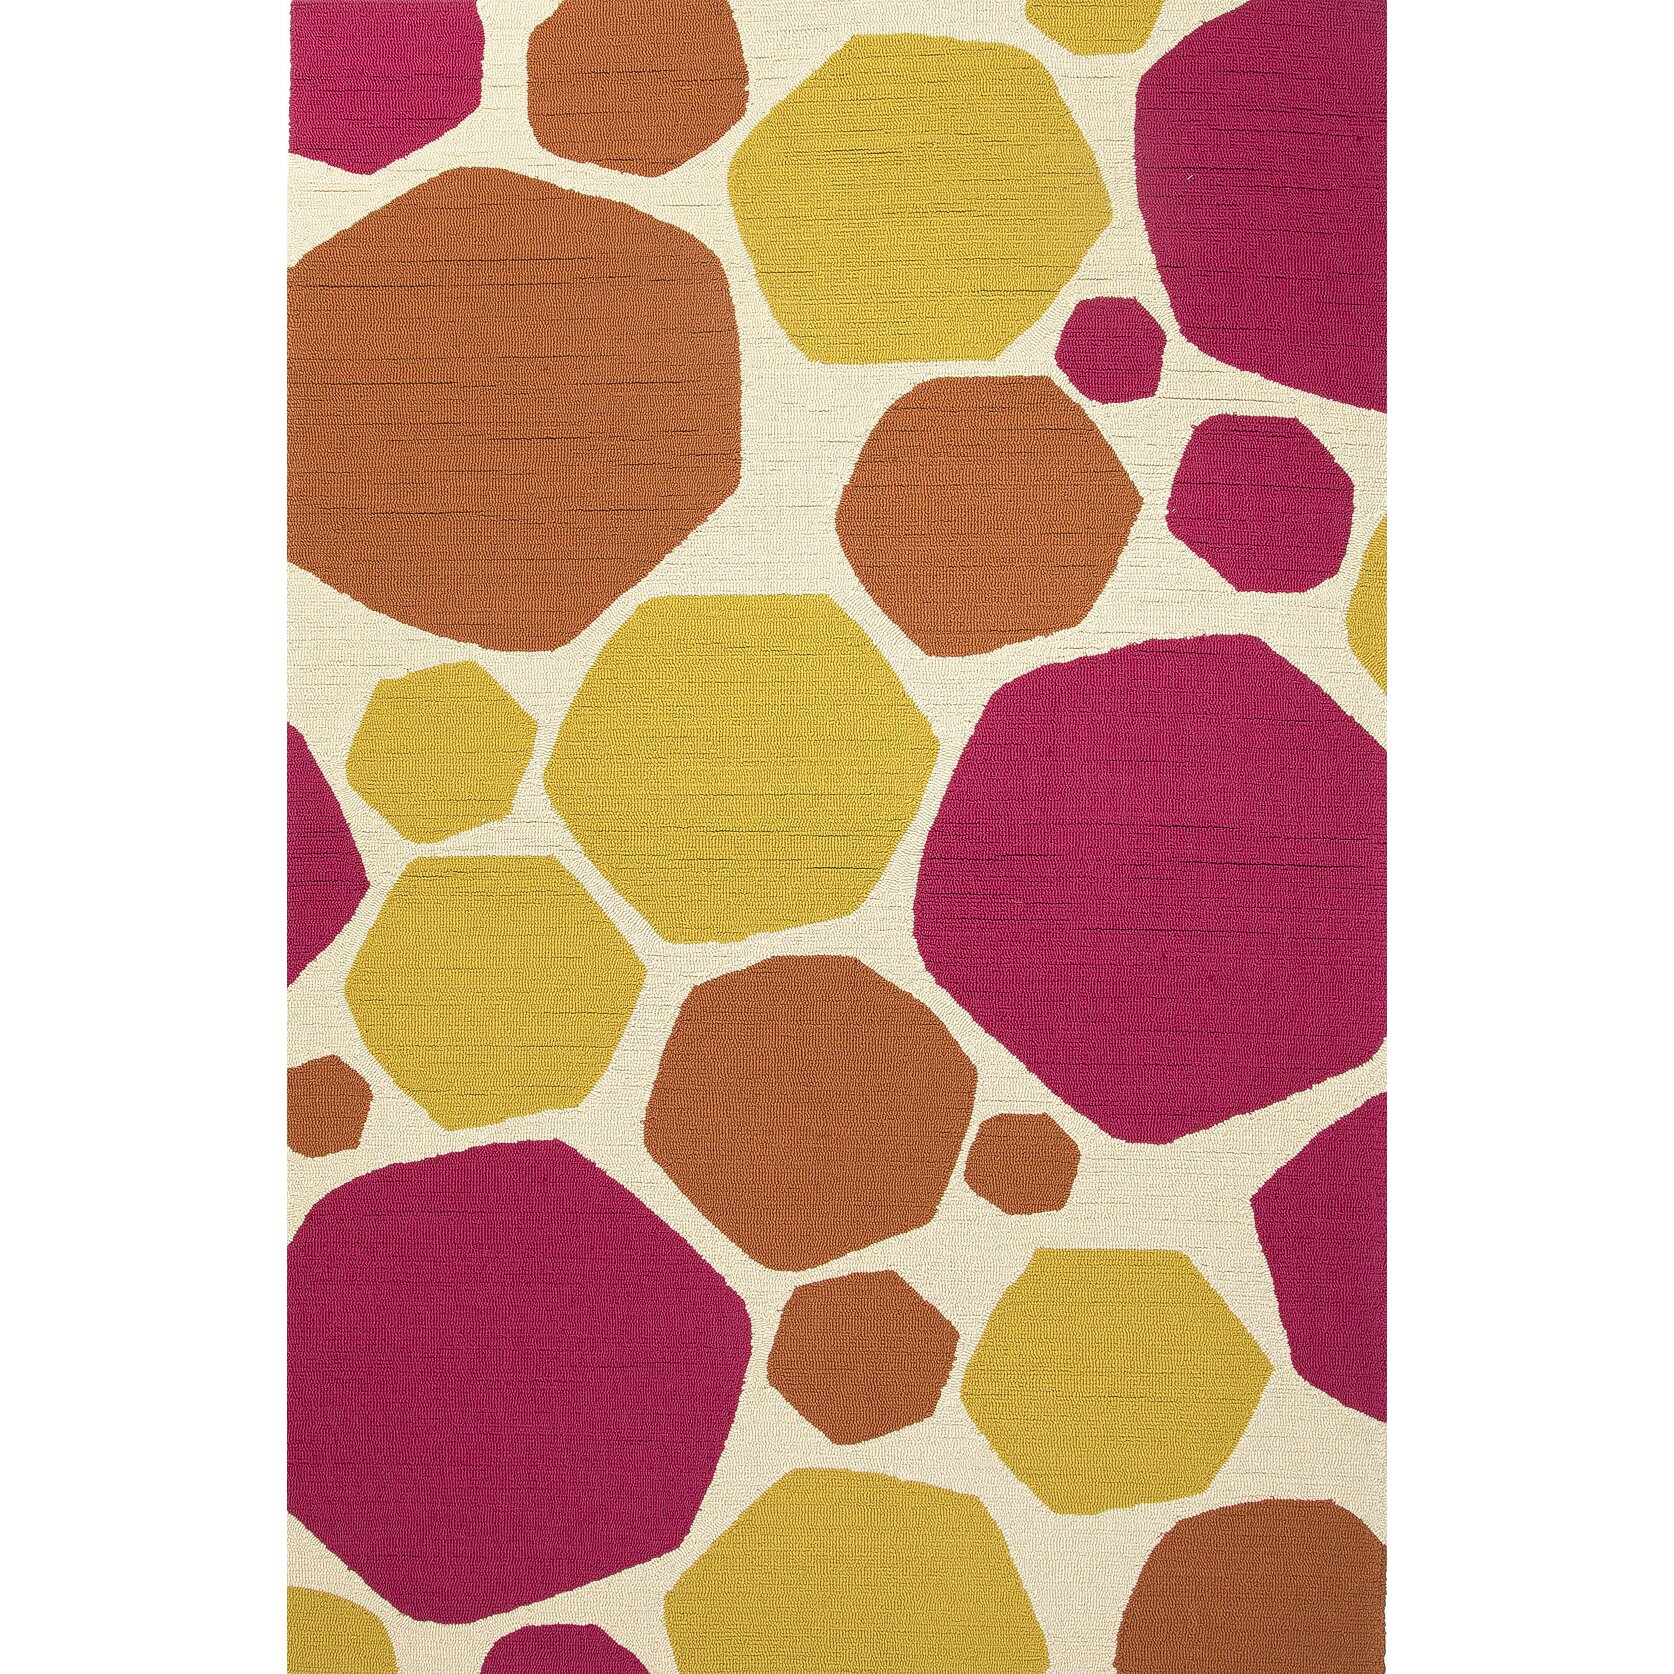 Grant Pink/Yellow Geometric Indoor/Outdoor Area Rug by Jaipur Rugs